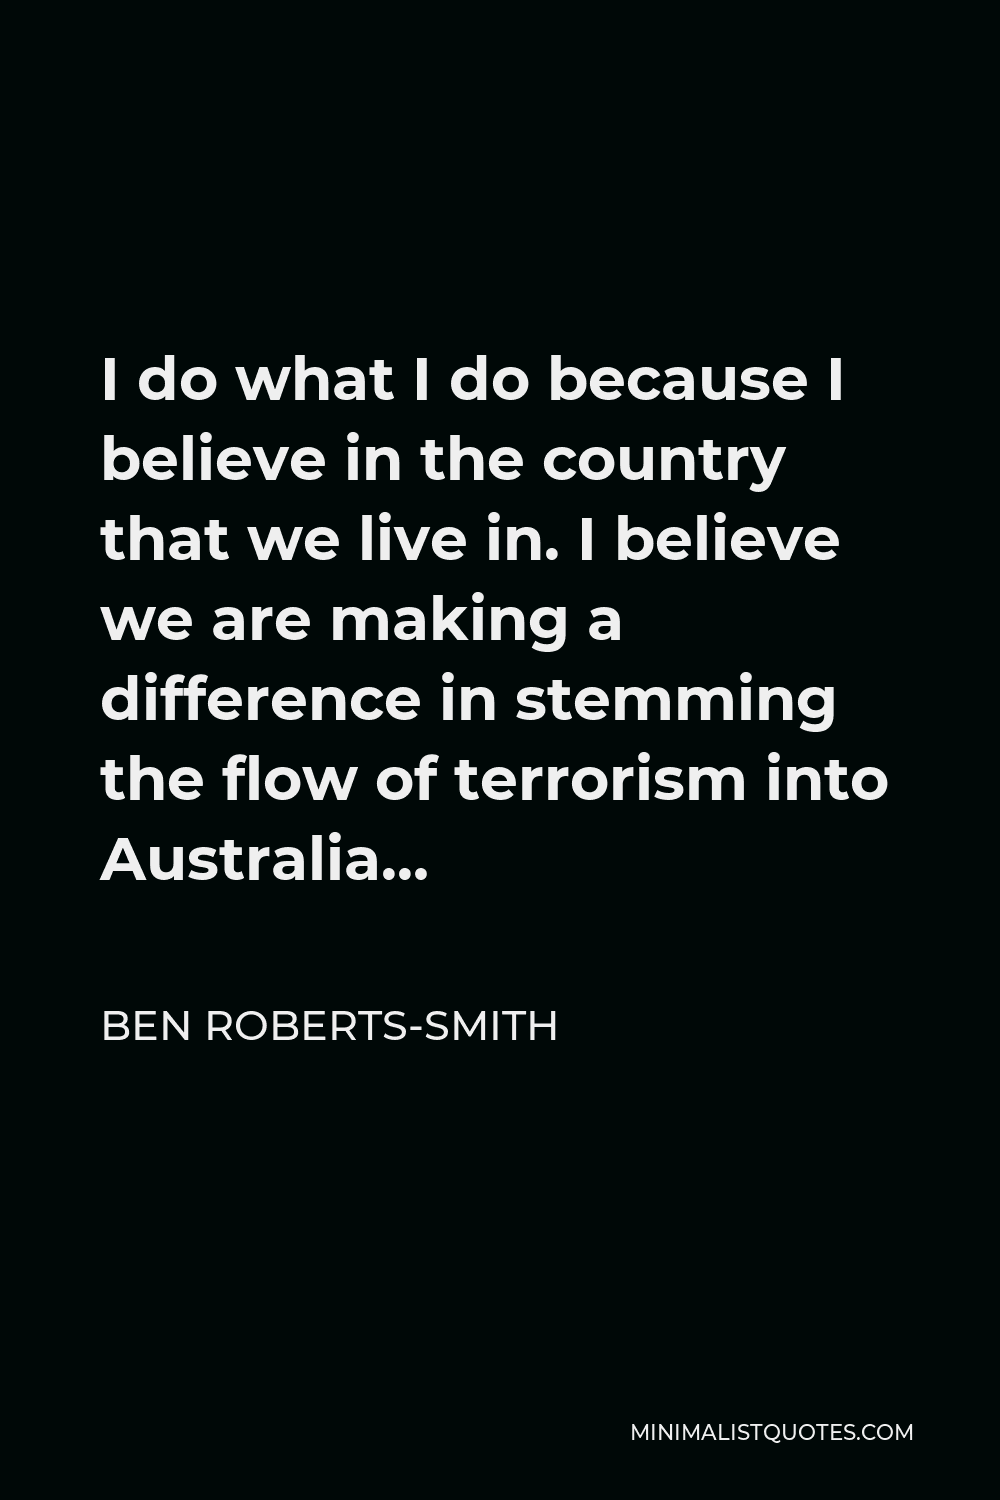 Ben Roberts-Smith Quote - I do what I do because I believe in the country that we live in. I believe we are making a difference in stemming the flow of terrorism into Australia…